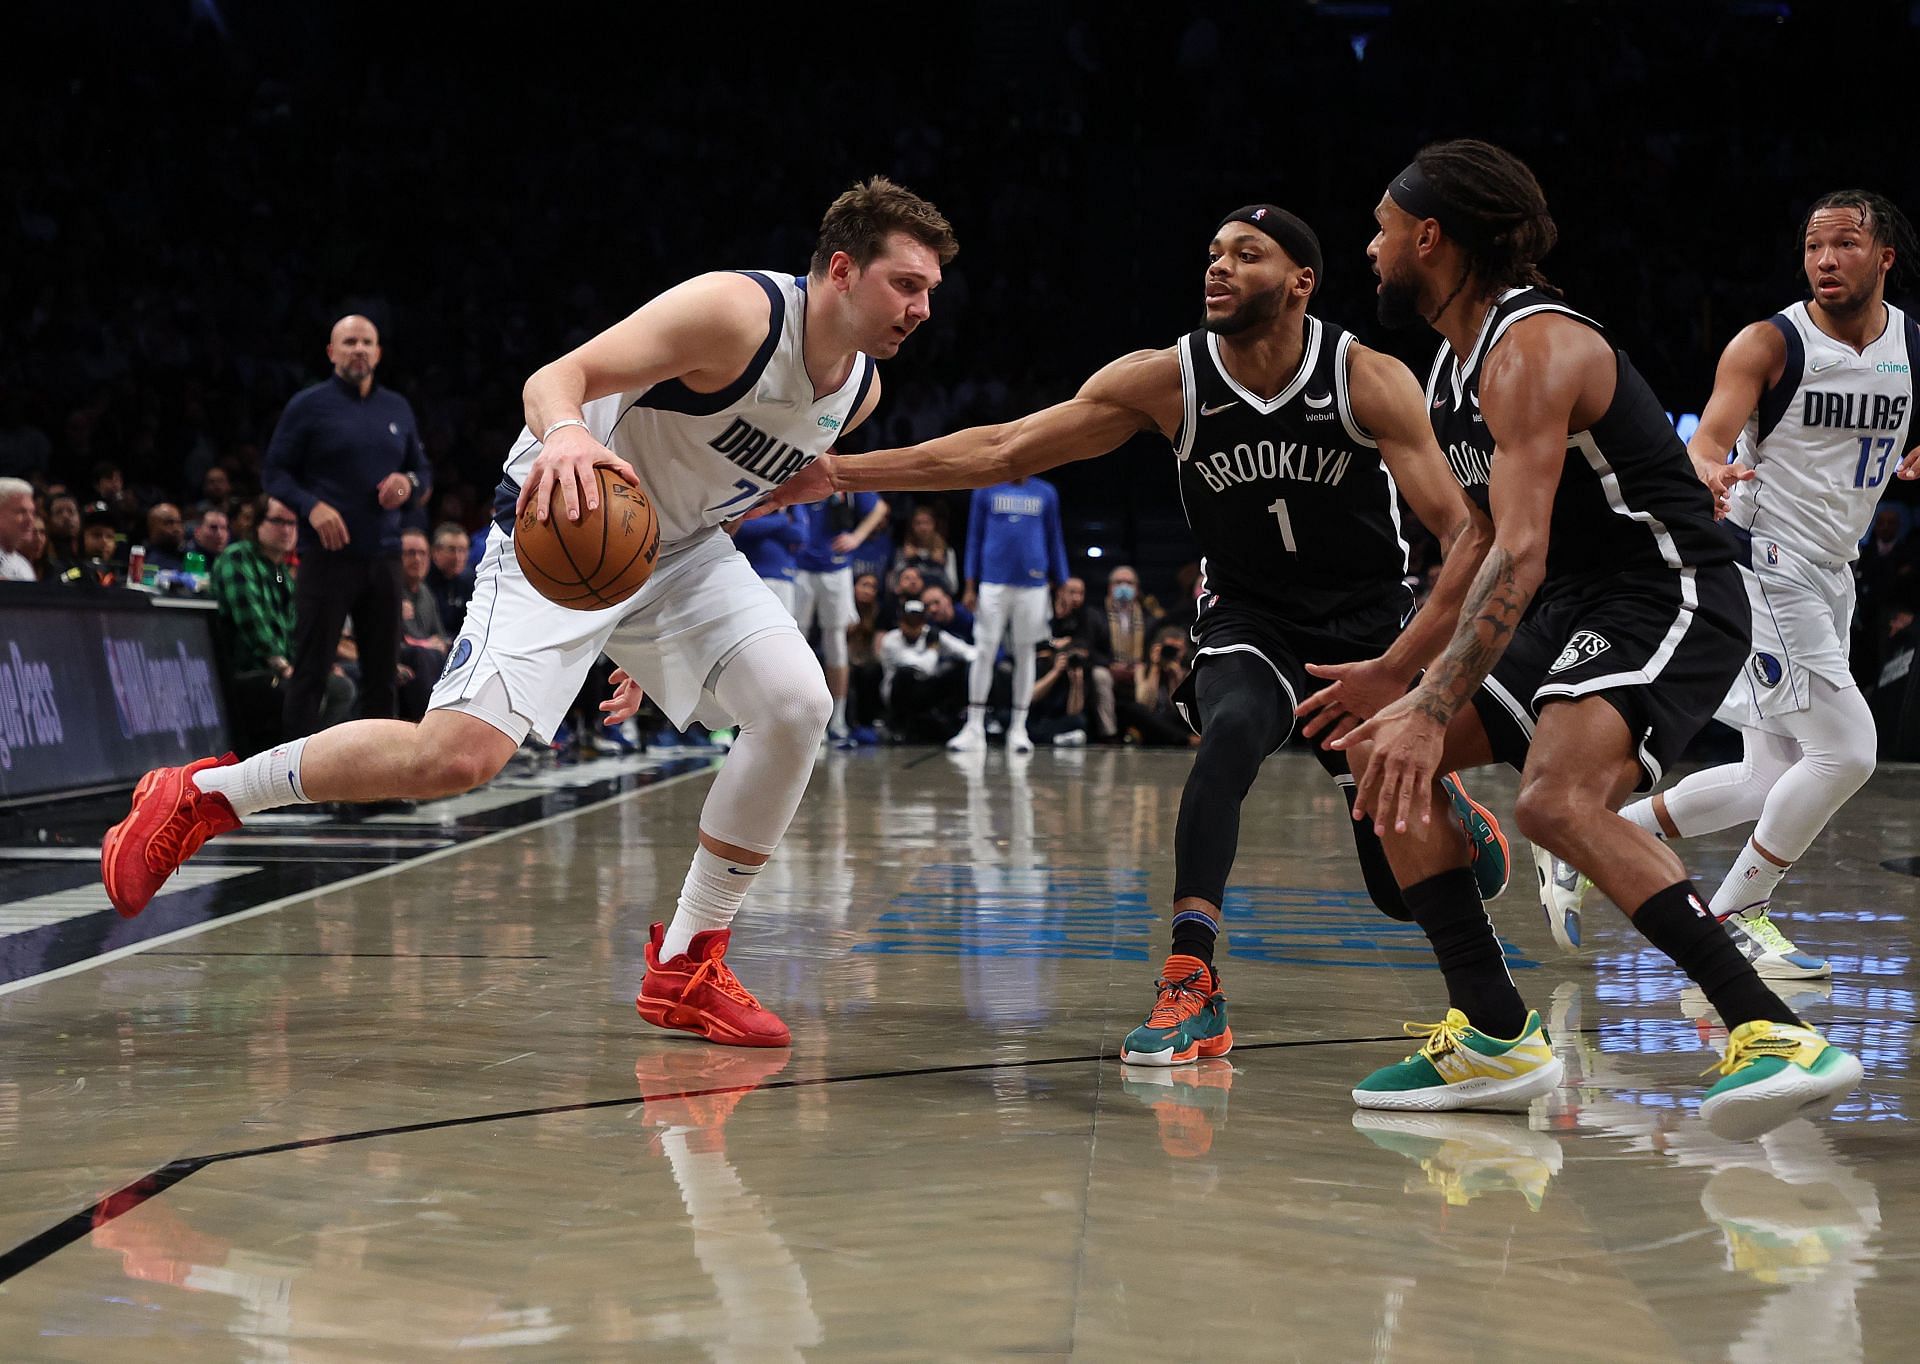 Luka Doncic of the Dallas Mavericks drives against Bruce Brown of the Brooklyn Nets during their game at Barclays Center on March 16 in New York City.